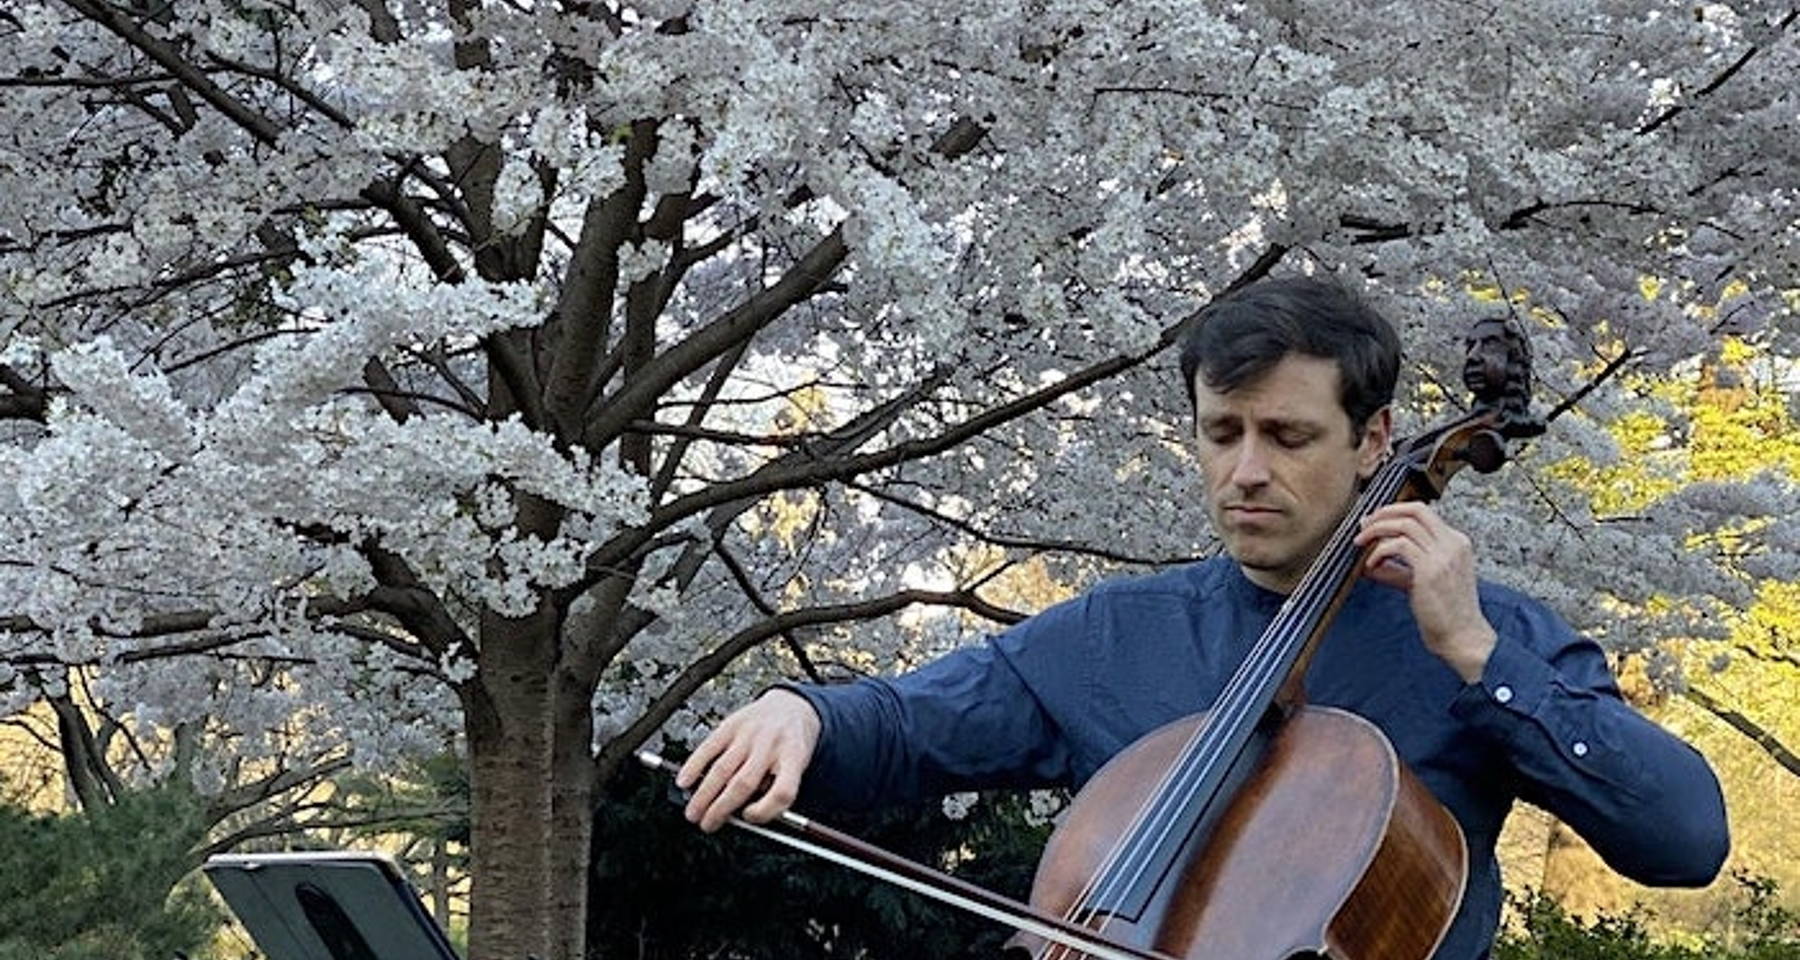 Cello @ Sunset: From Bach to West Side Story @ Central Park